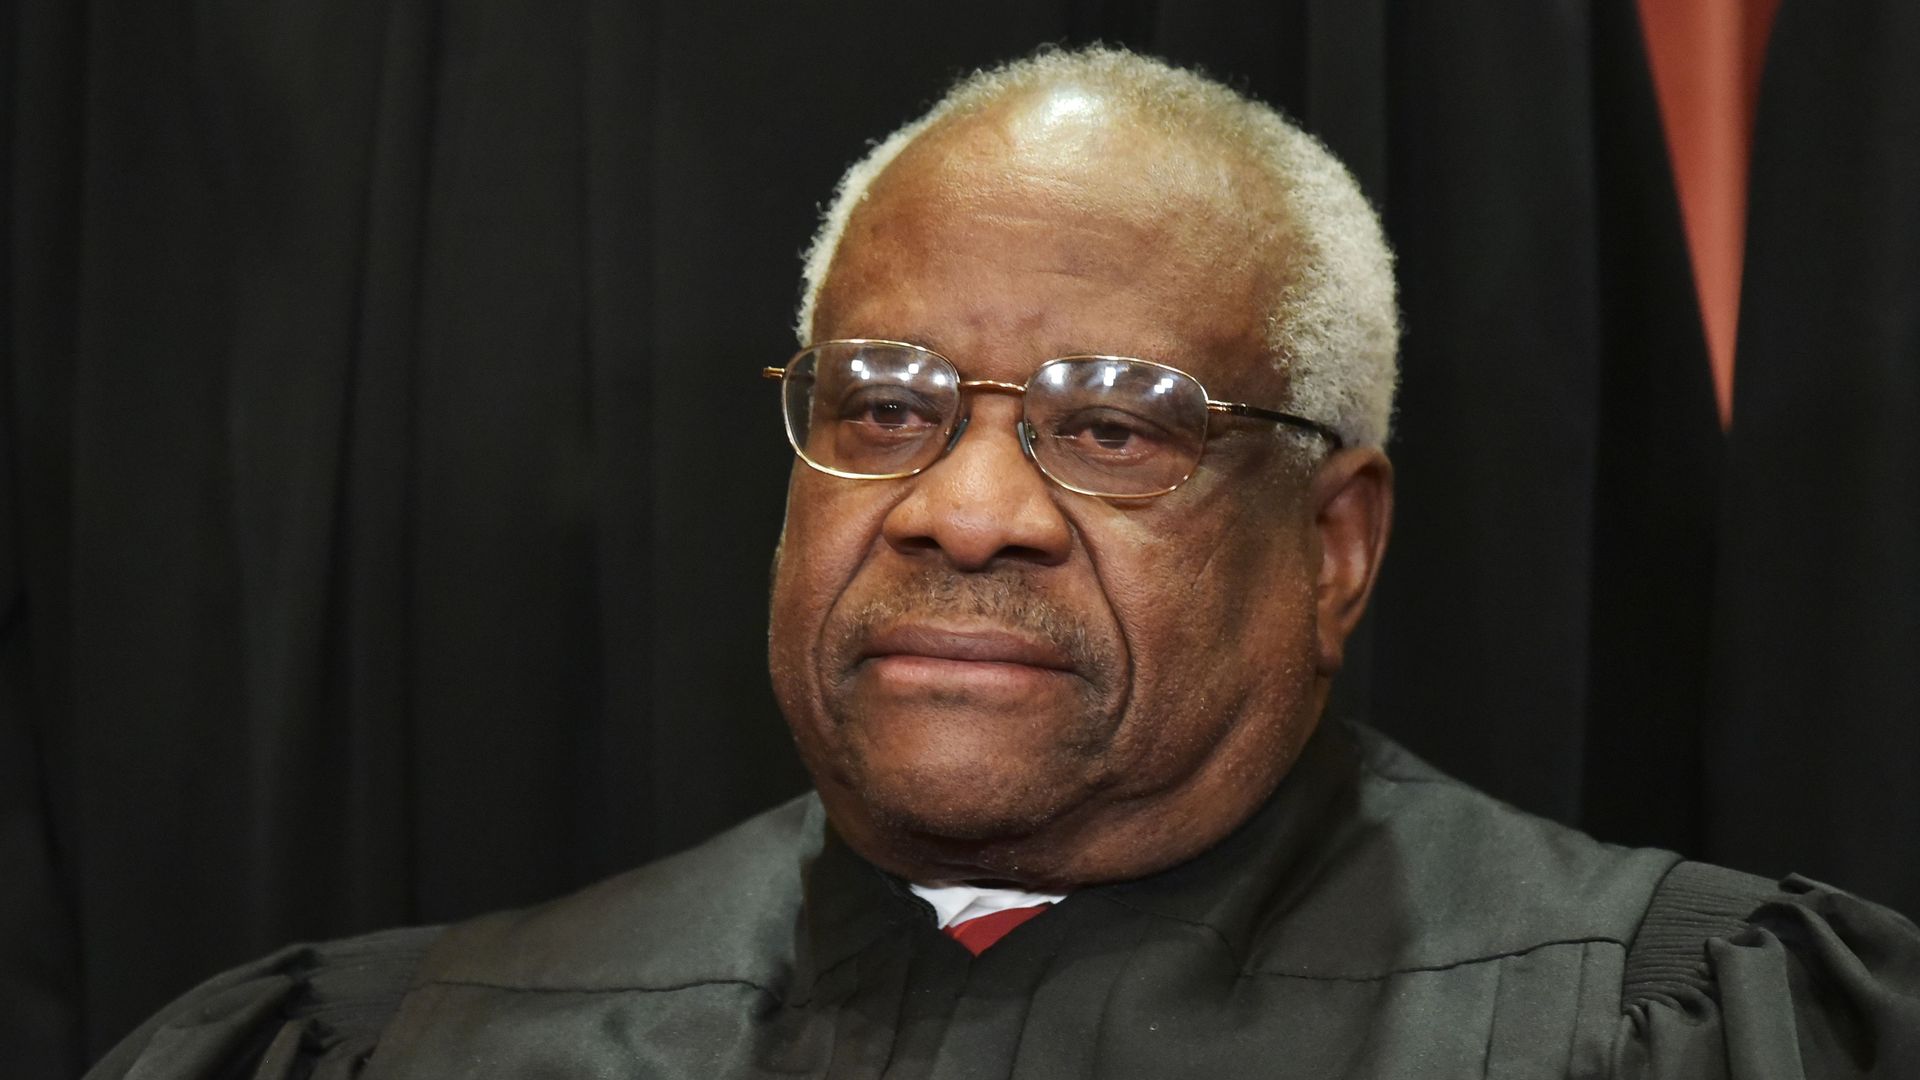 Associate Justice Clarence Thomas poses for the official group photo at the US Supreme Court in Washington, DC on November 30, 2018.